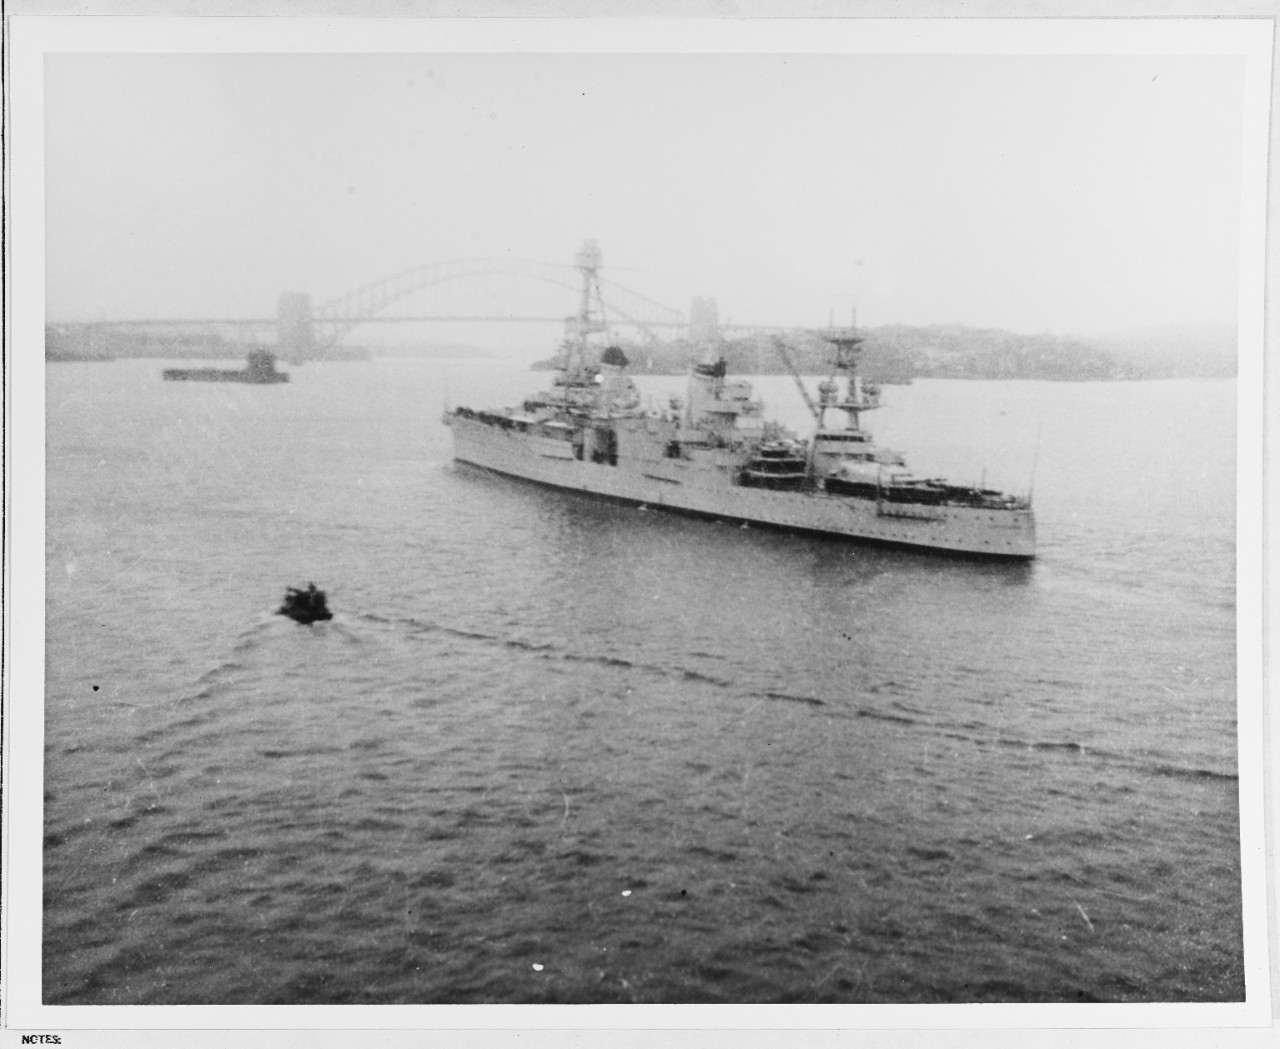 Famed Sydney Harbour Bridge looms through the haze as Chicago enters Sydney, Australia, 20 March 1941. (Naval History and Heritage Command Photograph NH 66291)